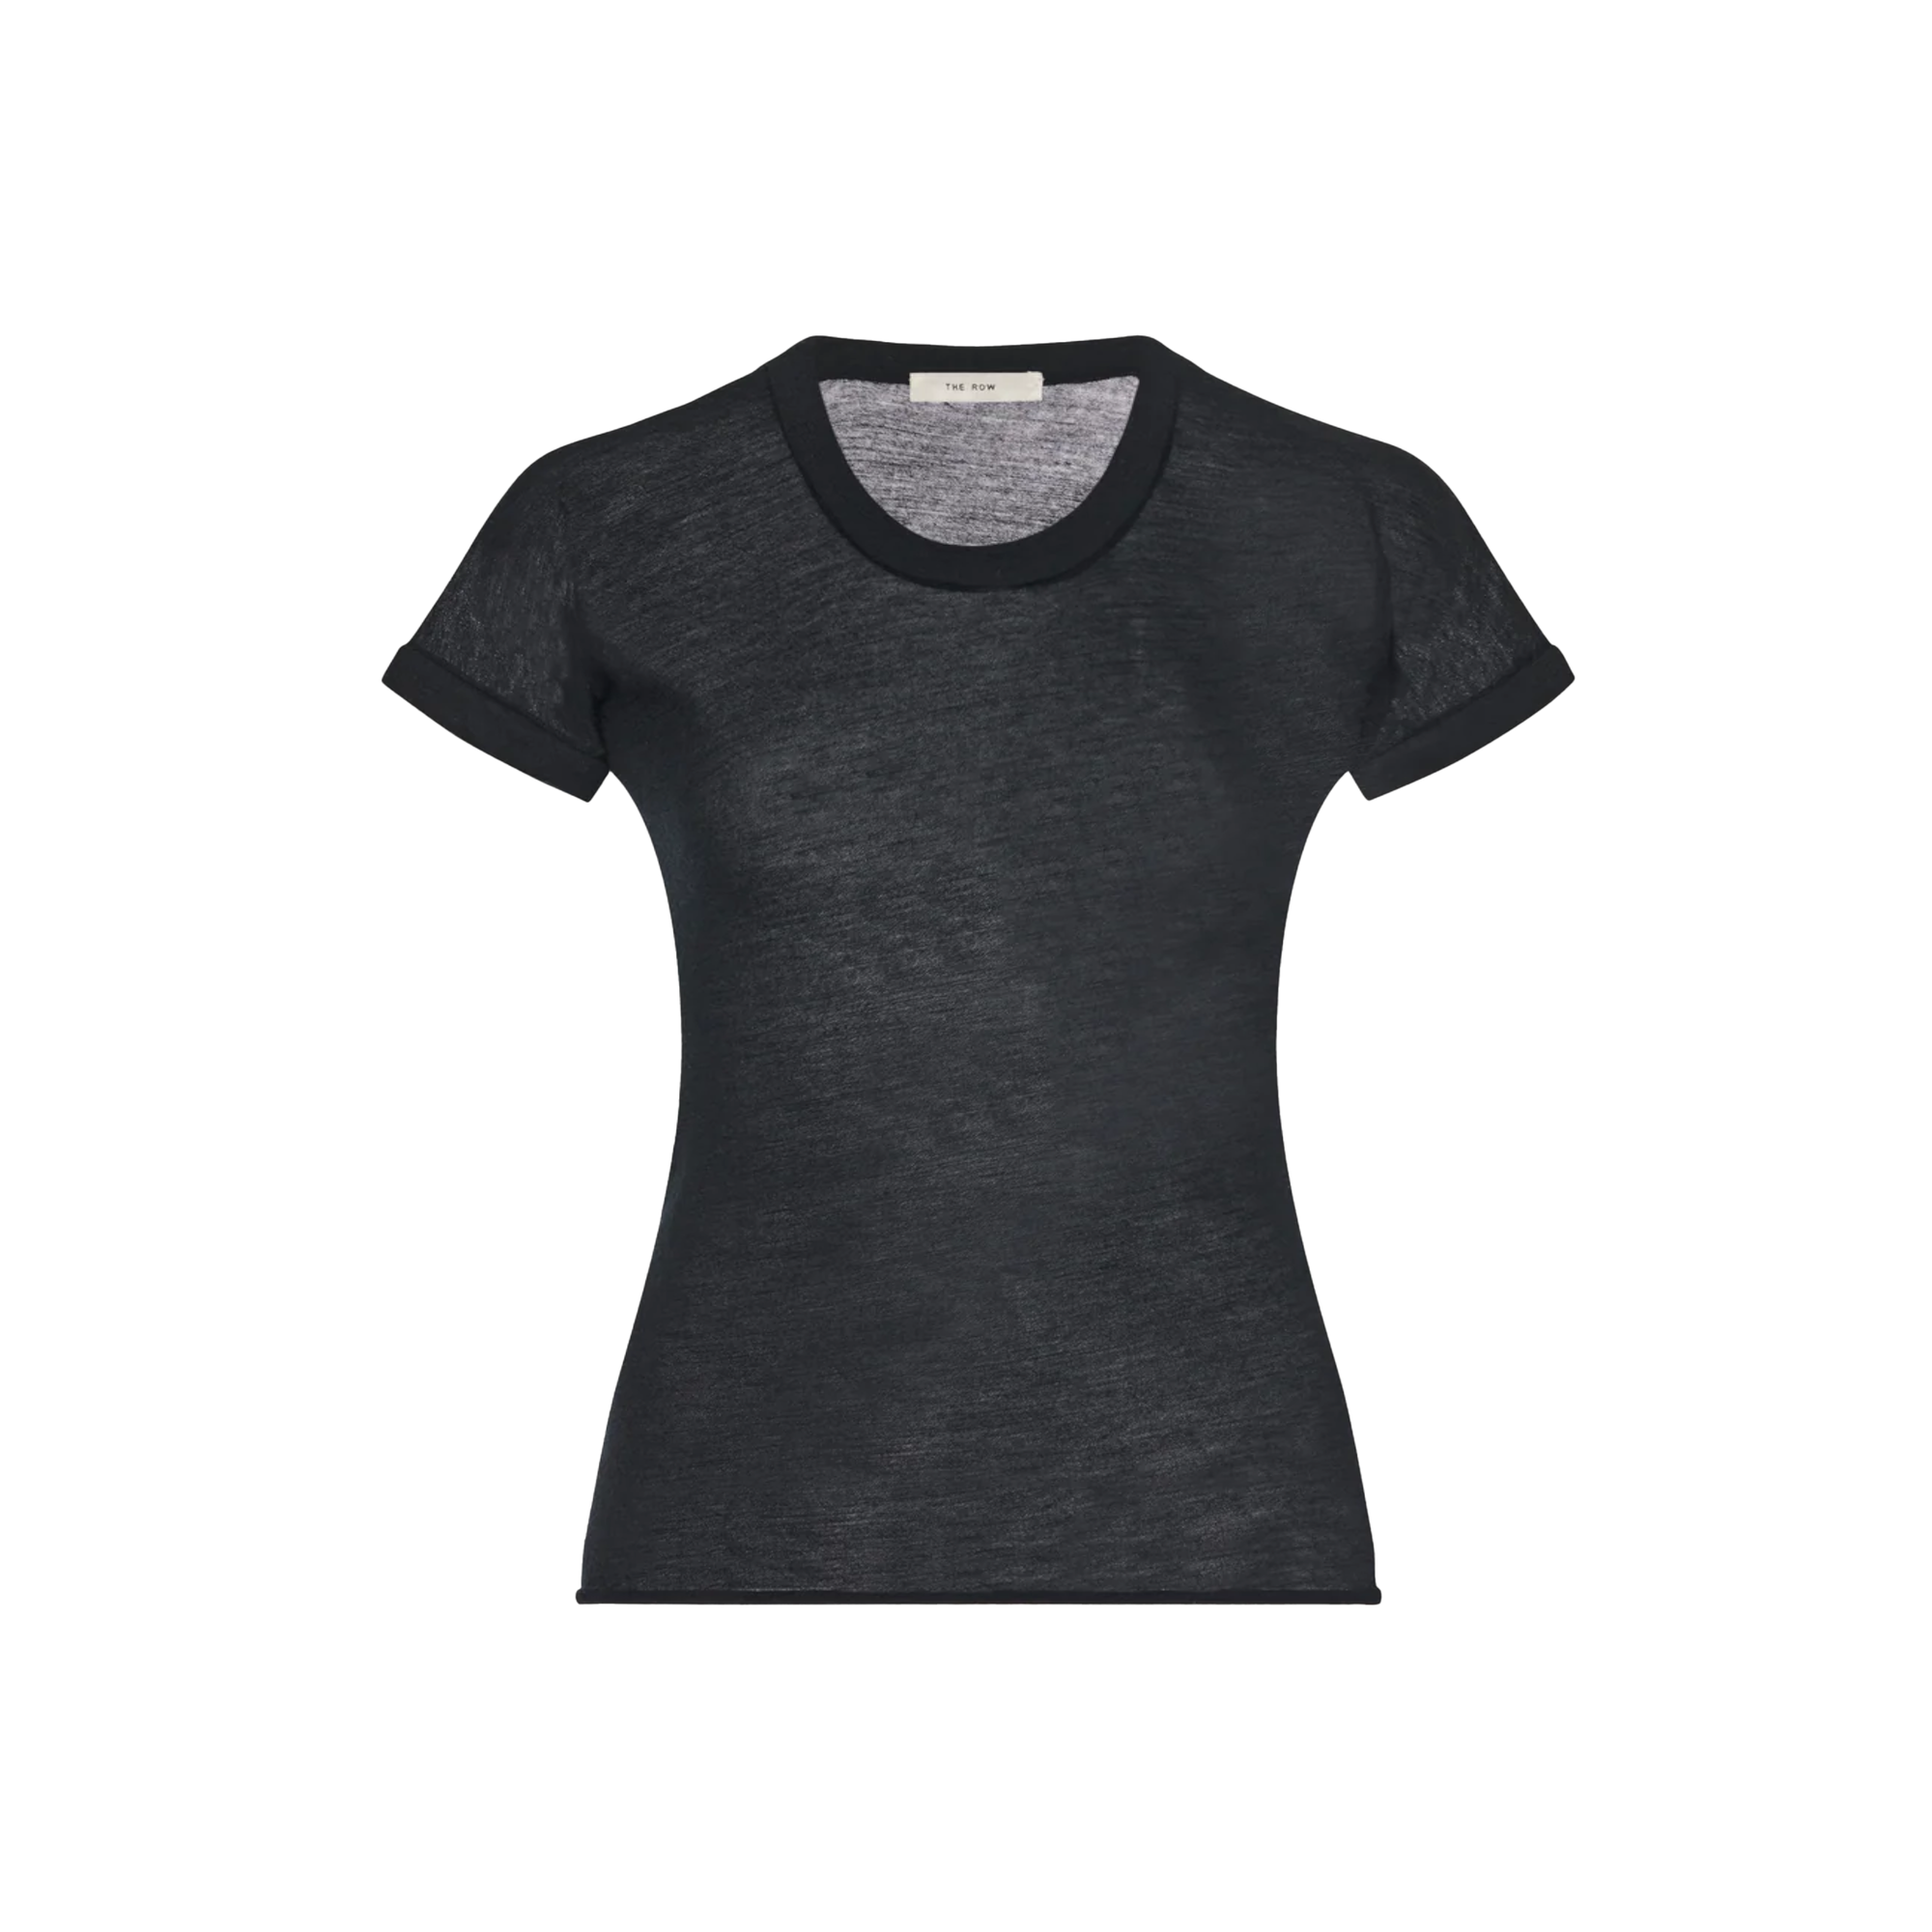 THE ROW - Women's Analyn Top - (Black) view 1